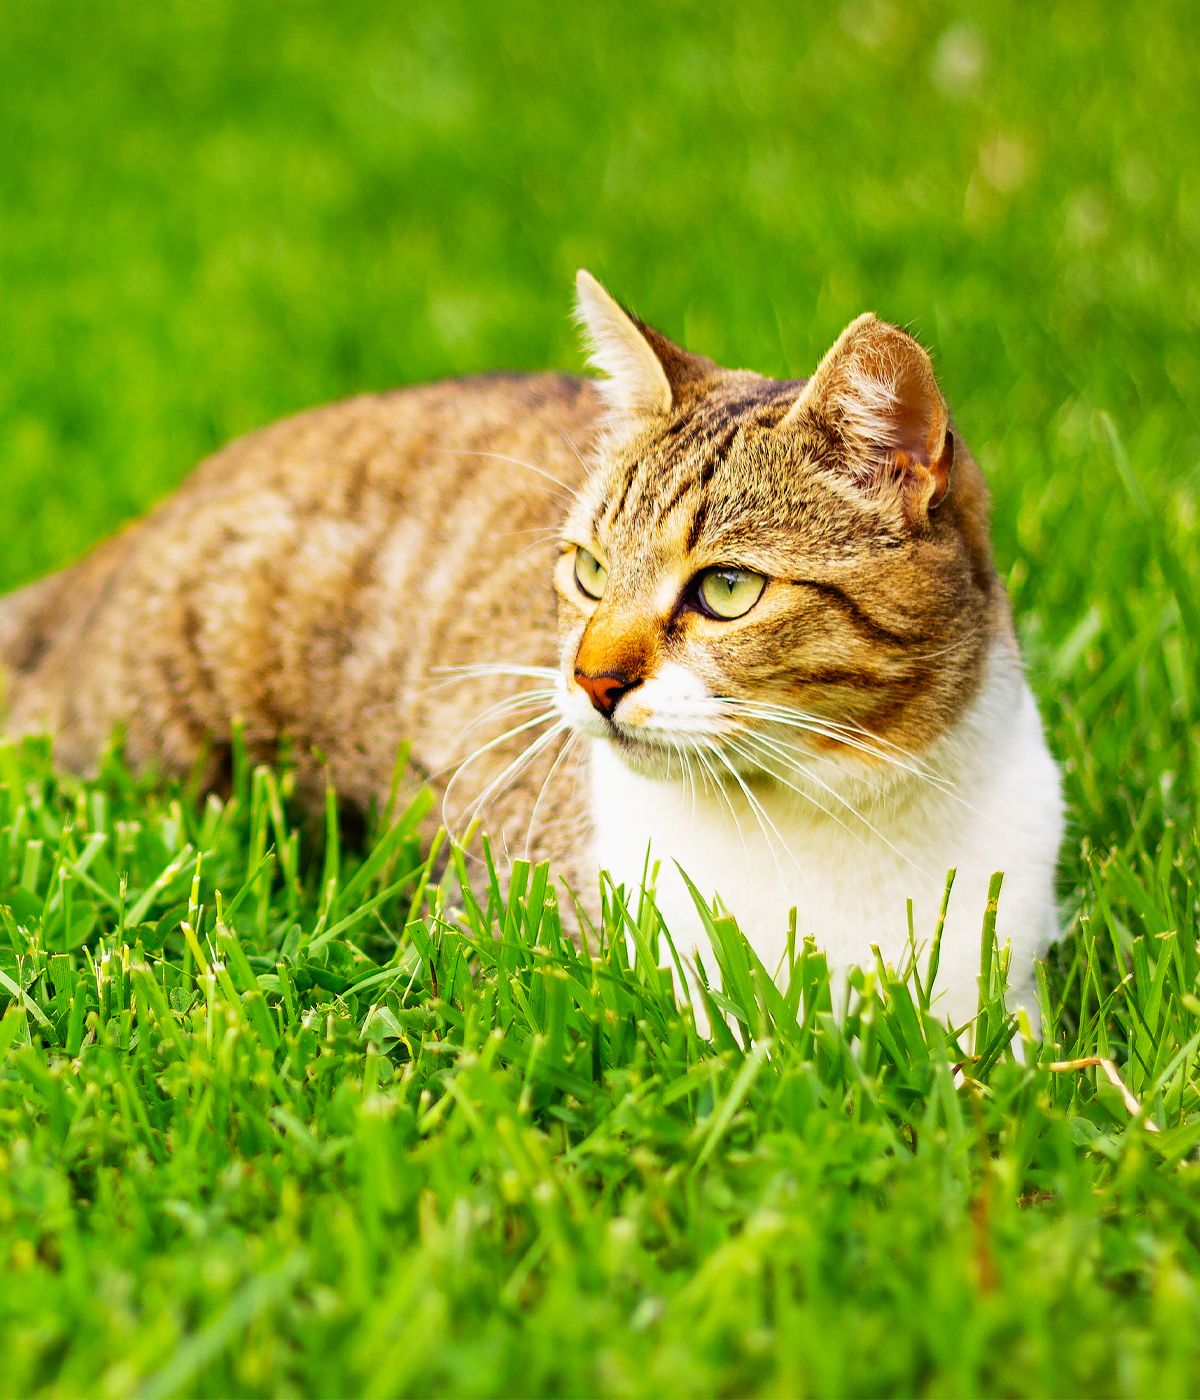 striped adult cat resting on green grass